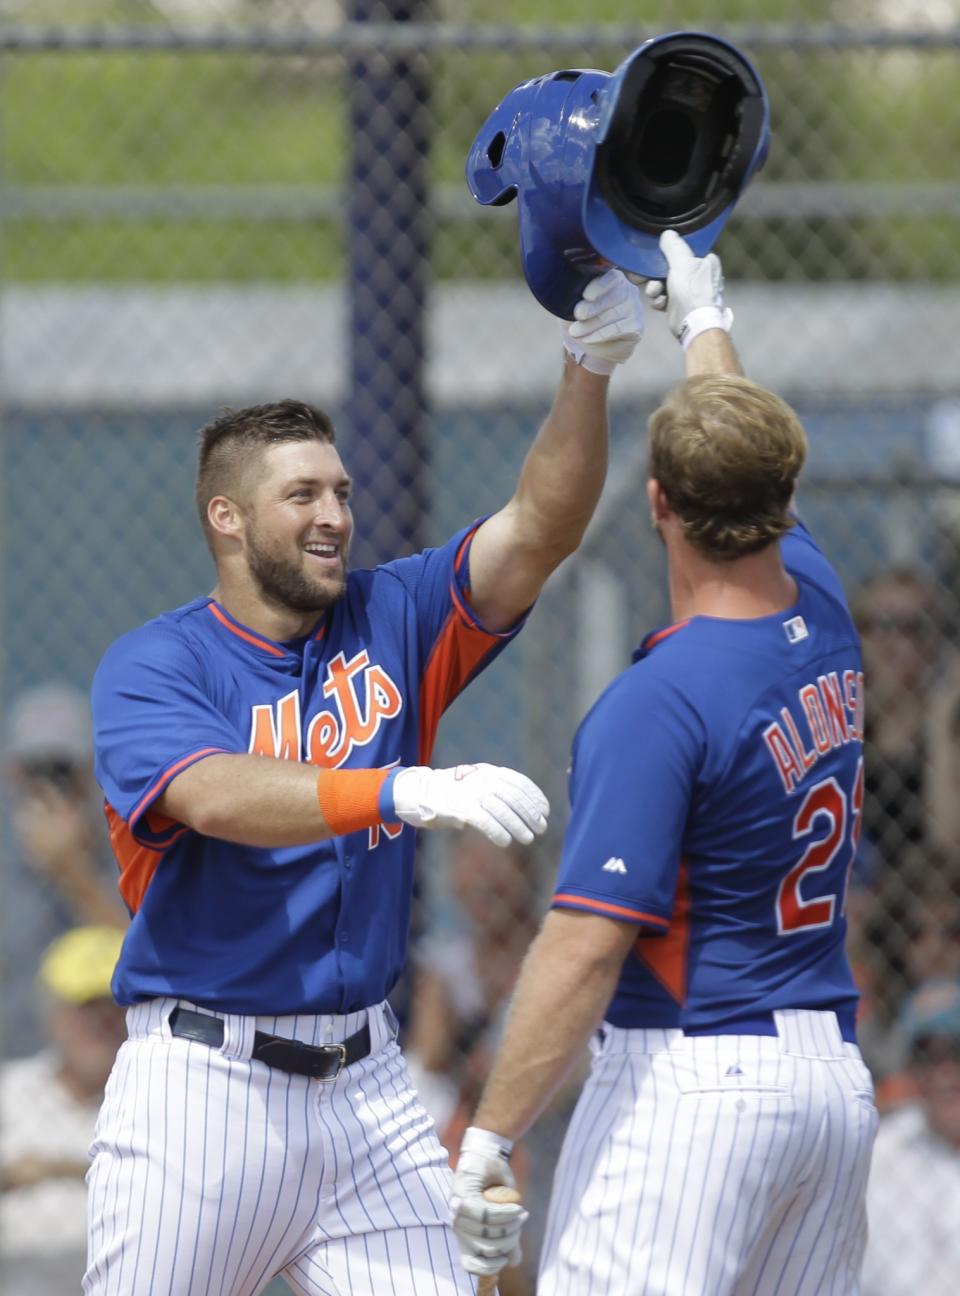 <p>Tim Tebow is greeted by Peter Alonso after hitting a solo home run in his first at bat during the first inning of his first instructional league baseball game for the New York Mets against the St. Louis Cardinals instructional club Wednesday, Sept. 28, 2016, in Port St. Lucie, Fla. (AP Photo/Luis M. Alvarez) </p>